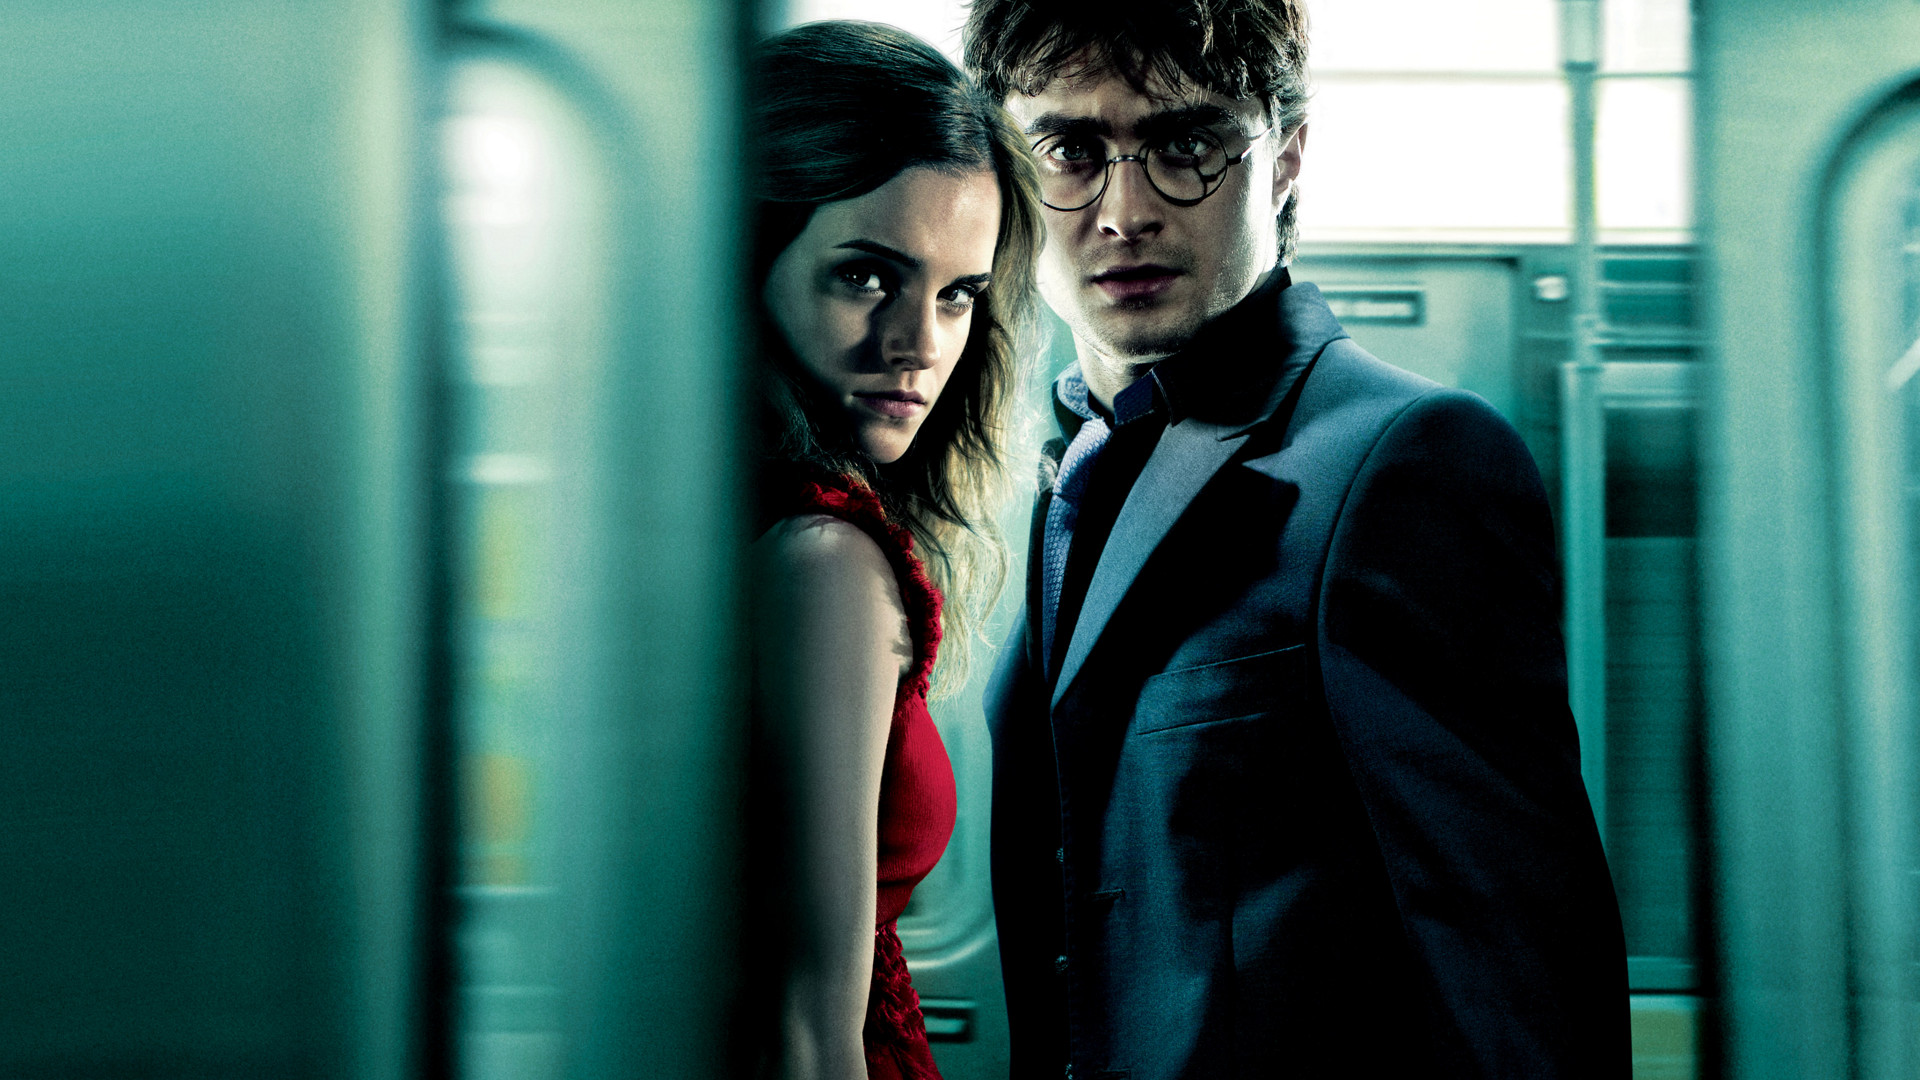 wallpapers hermione granger, harry potter, movie, harry potter and the deathly hallows: part 1, daniel radcliffe, emma watson